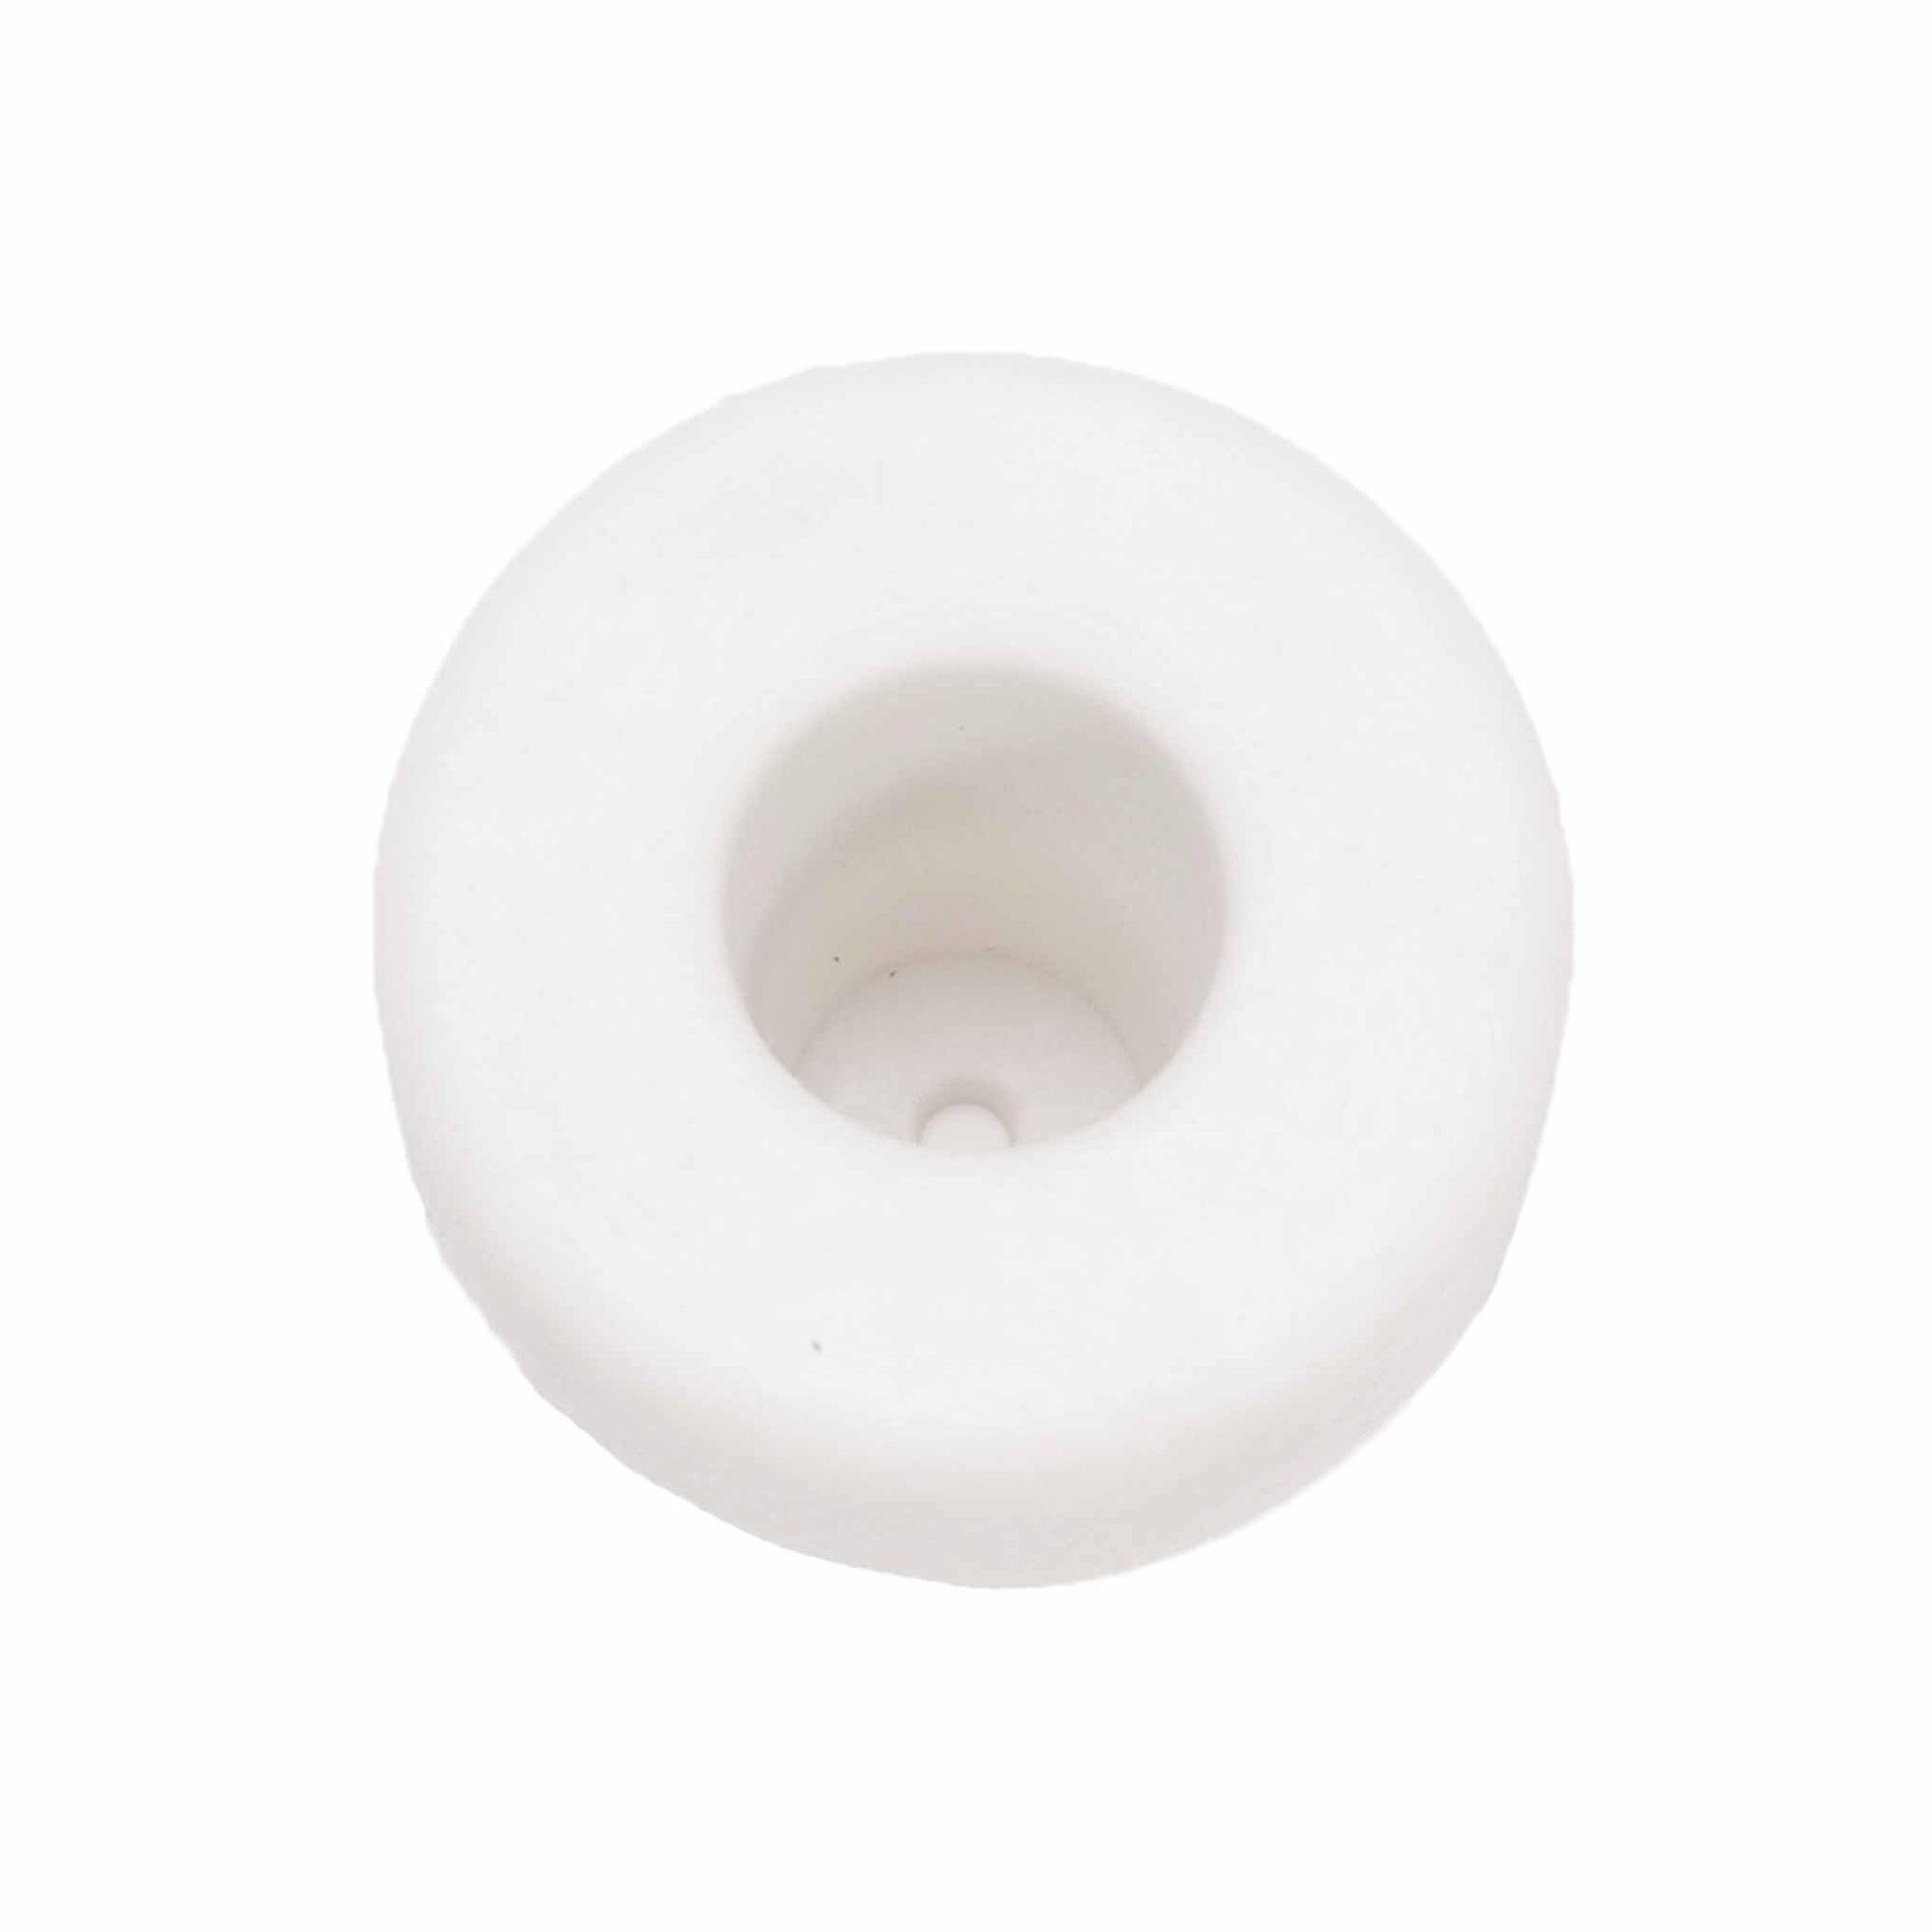 Pelican Cooler Replacement Foot round with screw